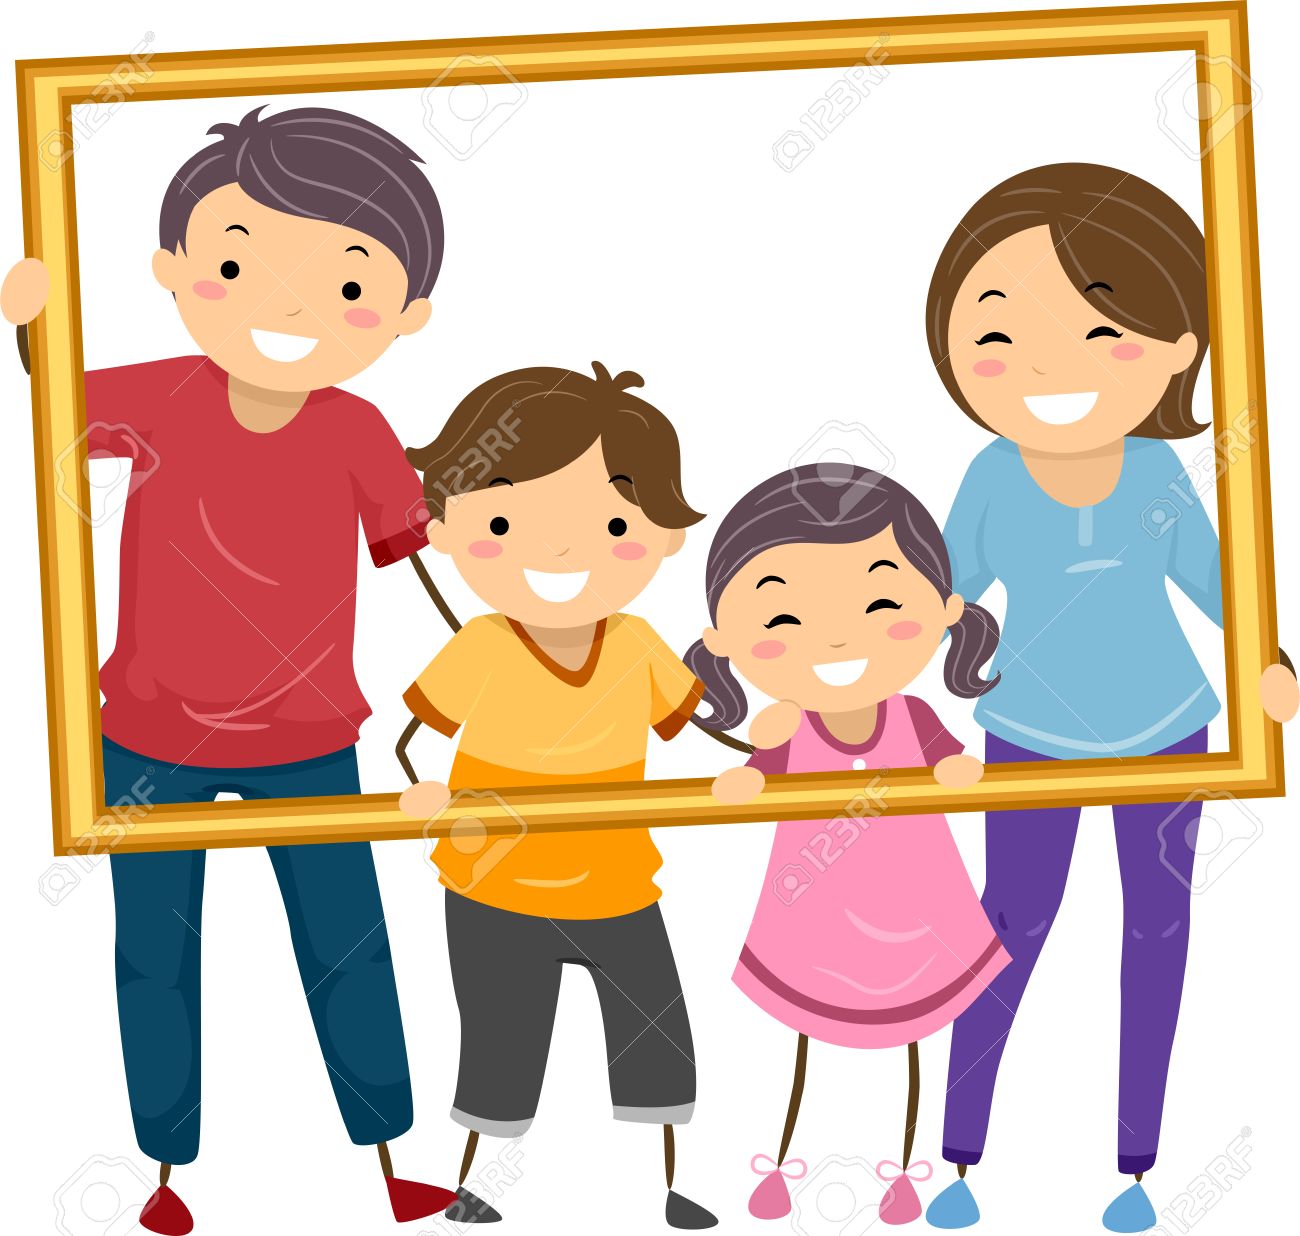 Illustration Featuring a Happy Family Holding a Hollow Frame Stock Vector - 31689328